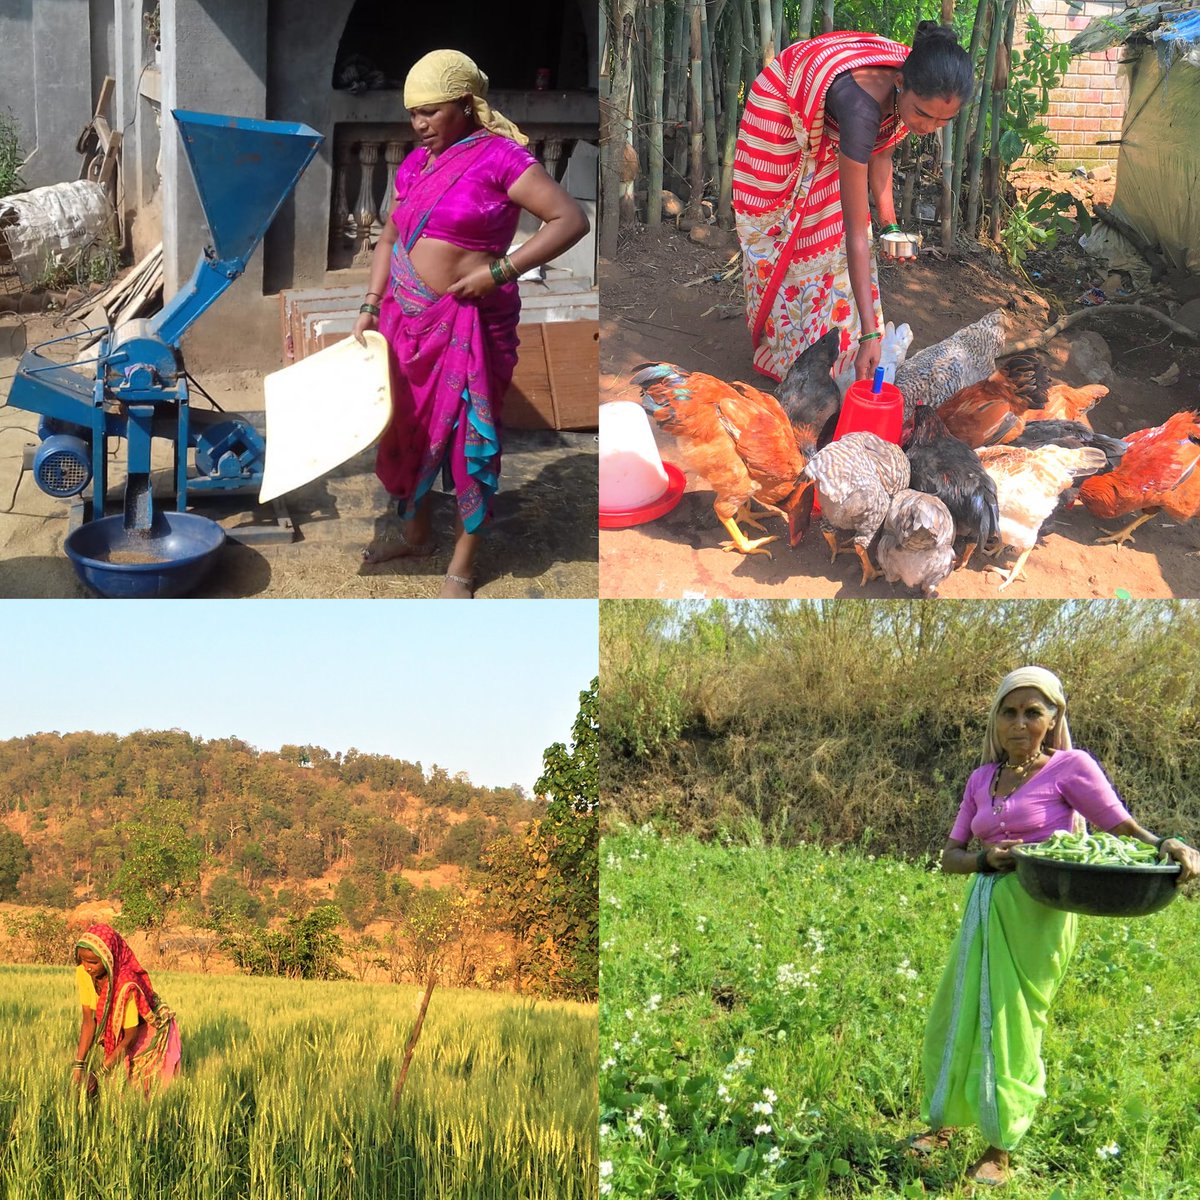 We're celebrating #InternationalWomensDay by encouraging the active participation of women's in Science. Bridging the #GenderGaps in #Agriculture & #FoodSystems through  #genderinclusion is most important. 

#ClimateSmartVillageProgram
#IWD23 @BISA__India @CIMMYT @CGIARgender